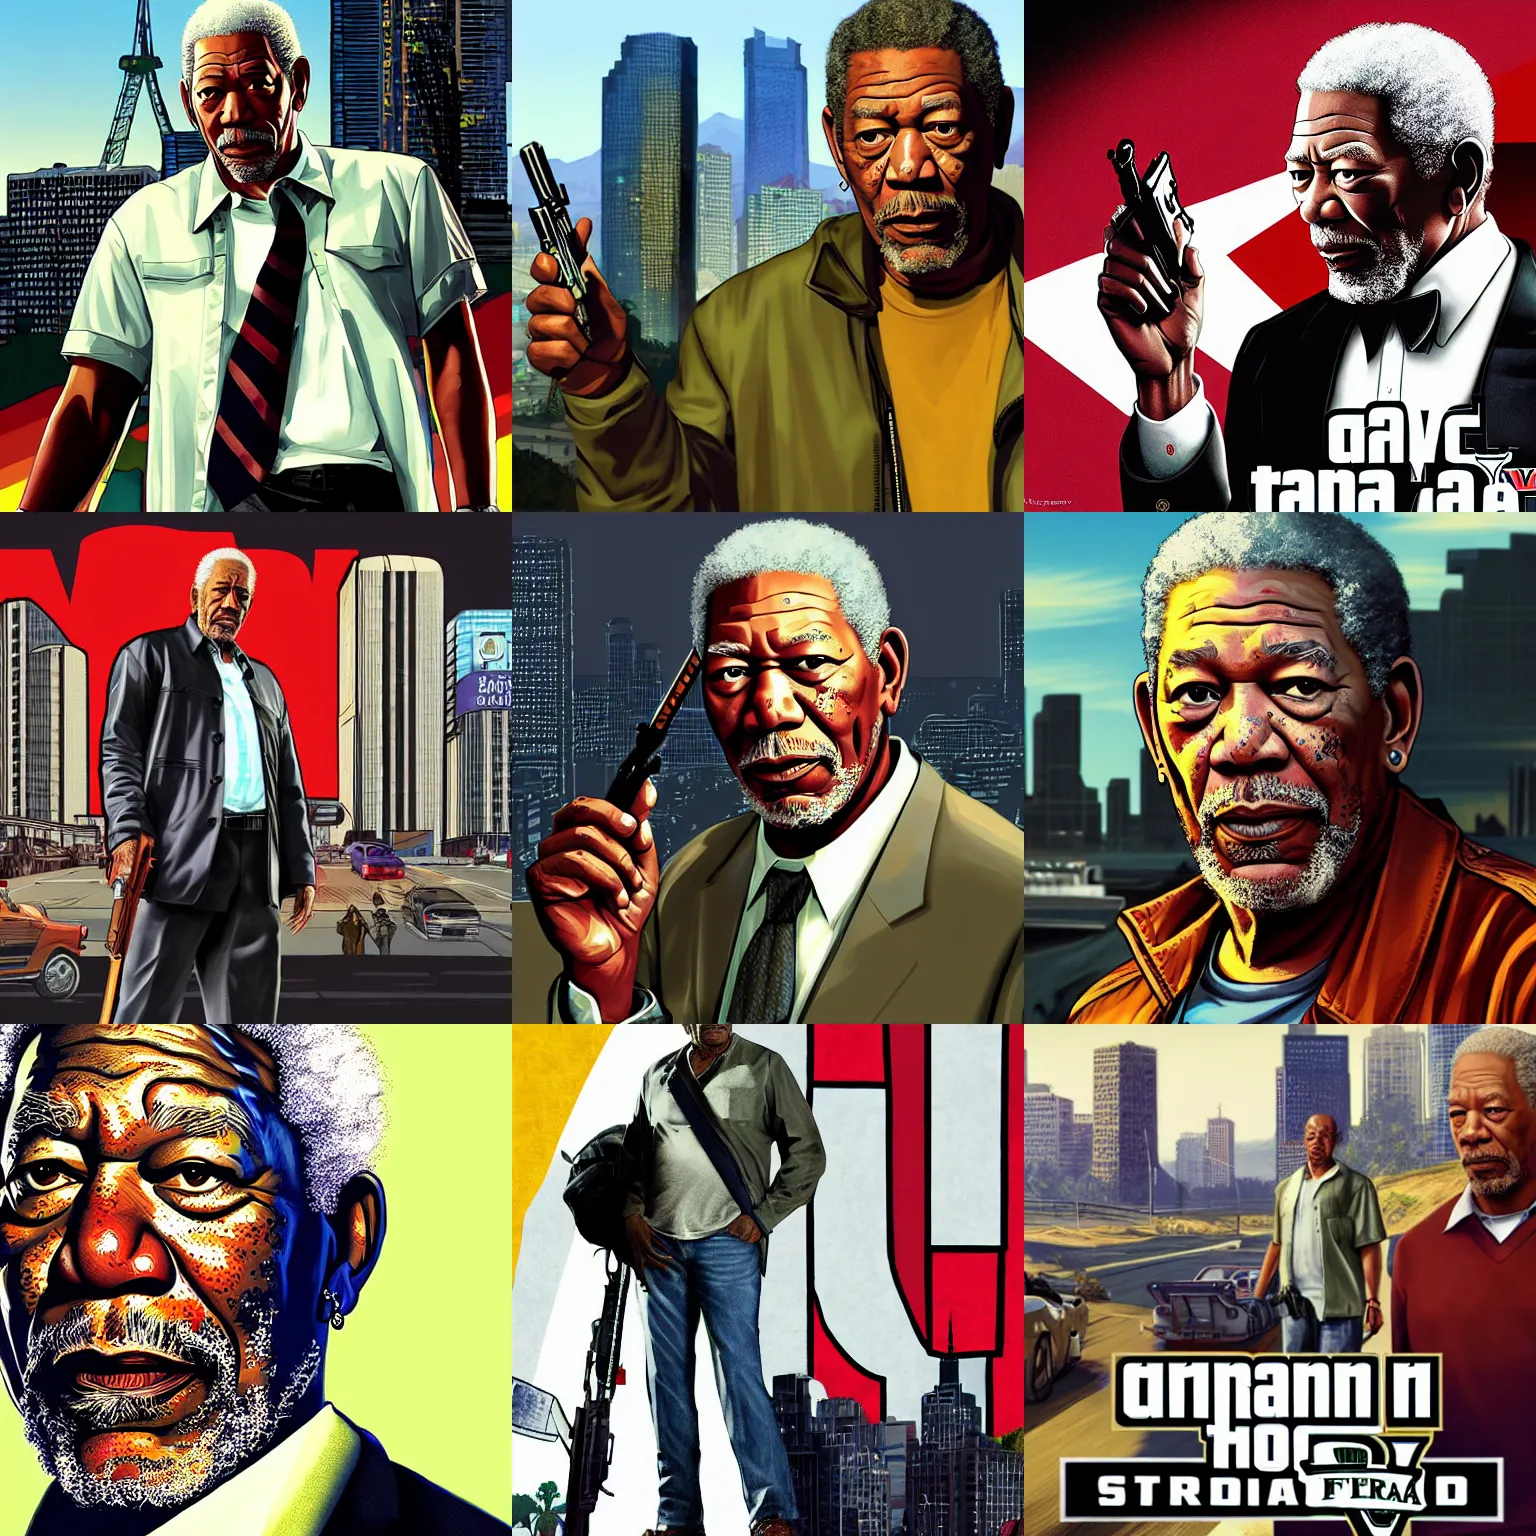 Prompt: morgan freeman in gta v promotional art by stephen bliss, no text